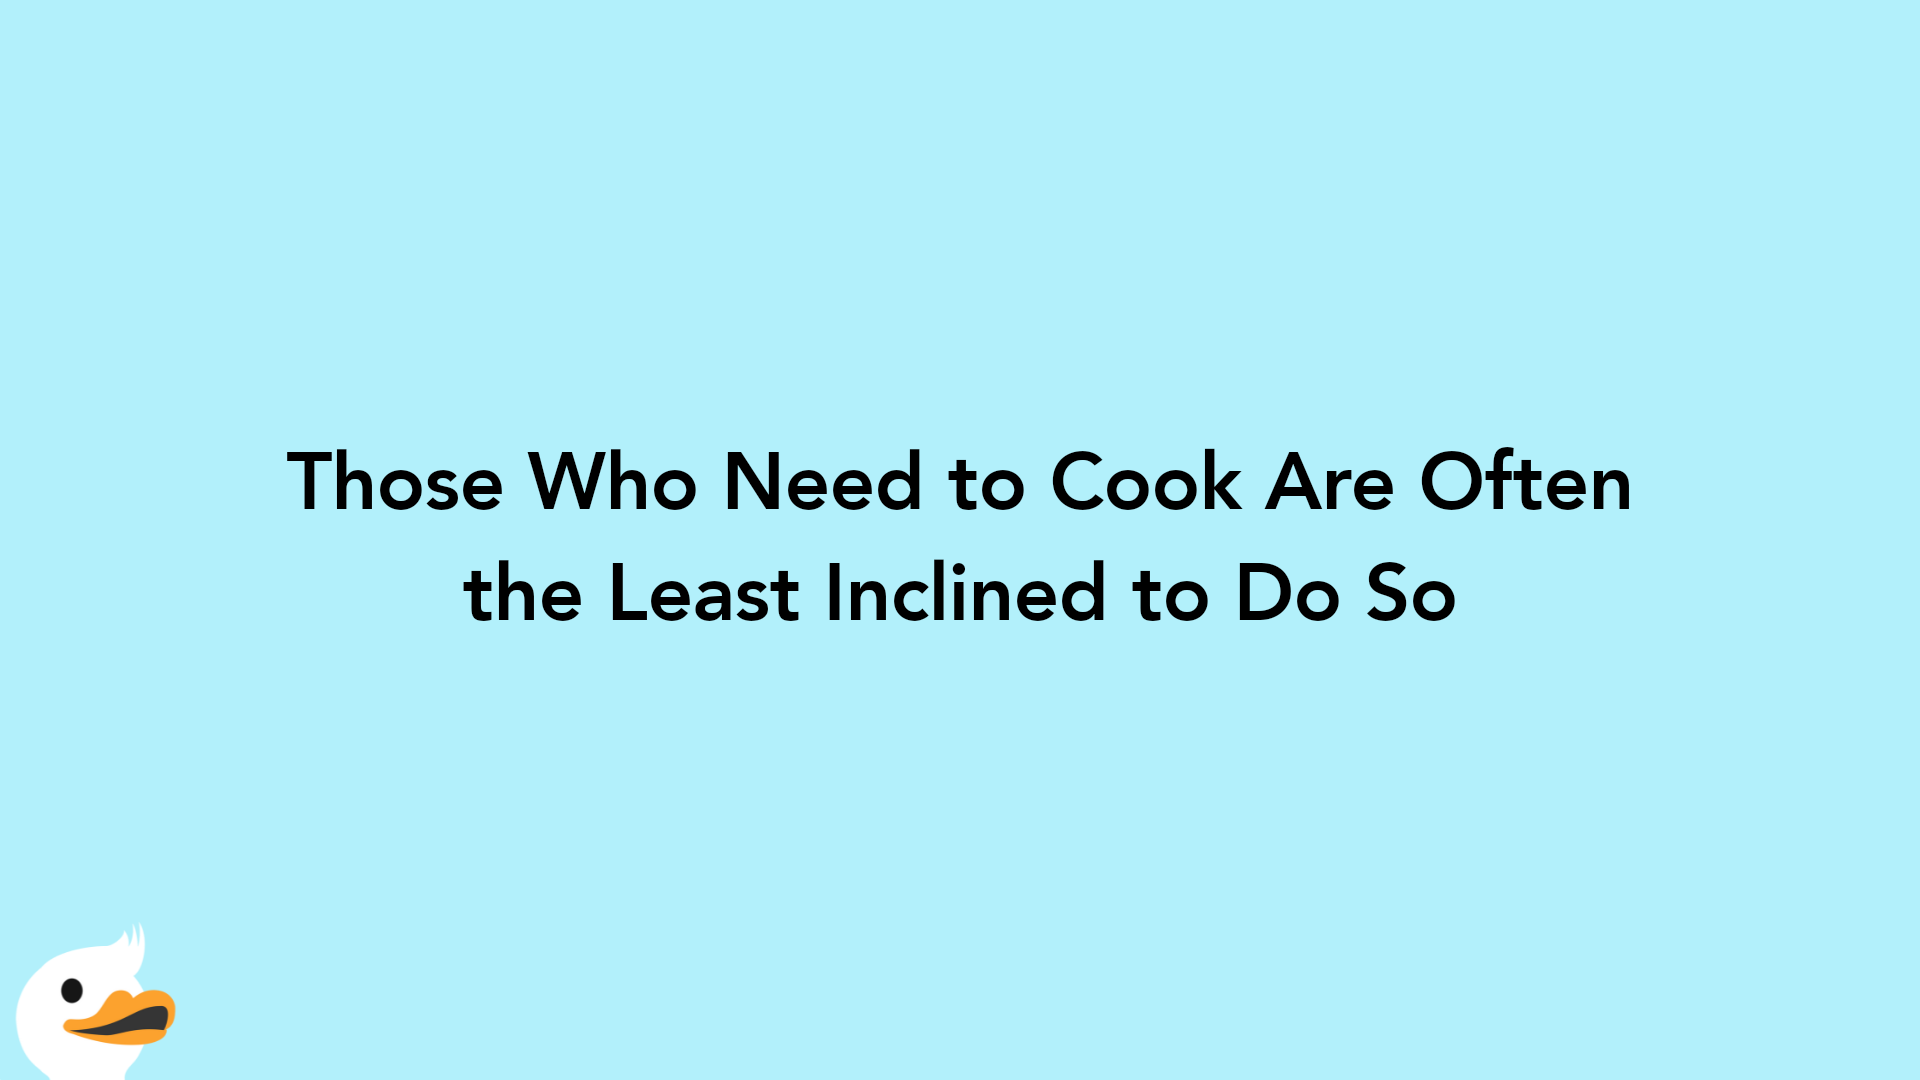 Those Who Need to Cook Are Often the Least Inclined to Do So